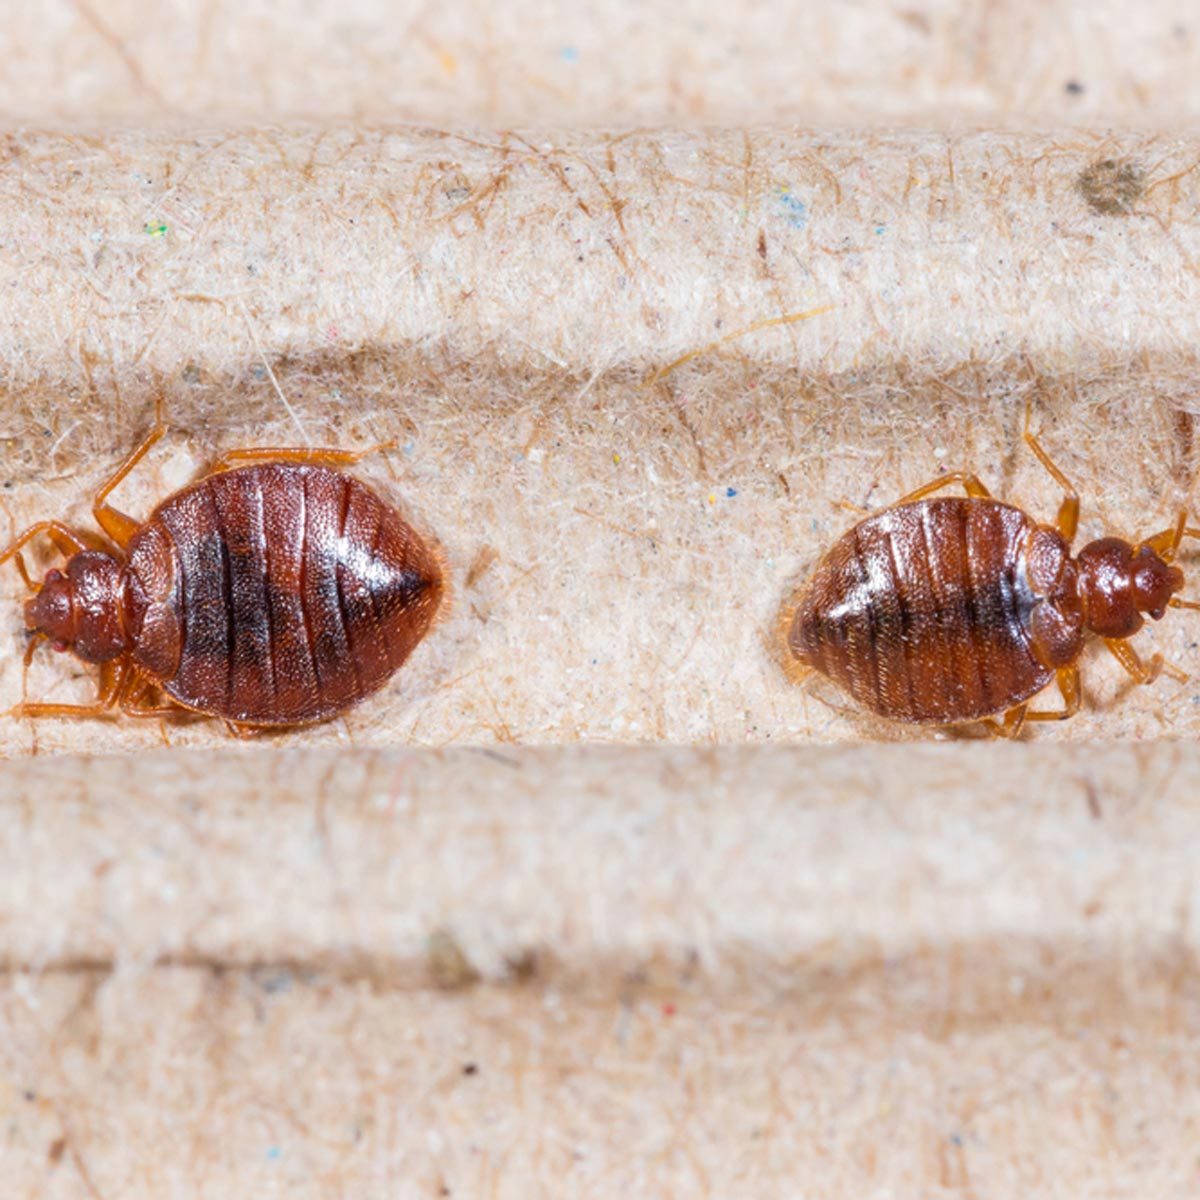 What Causes Bed Bugs?